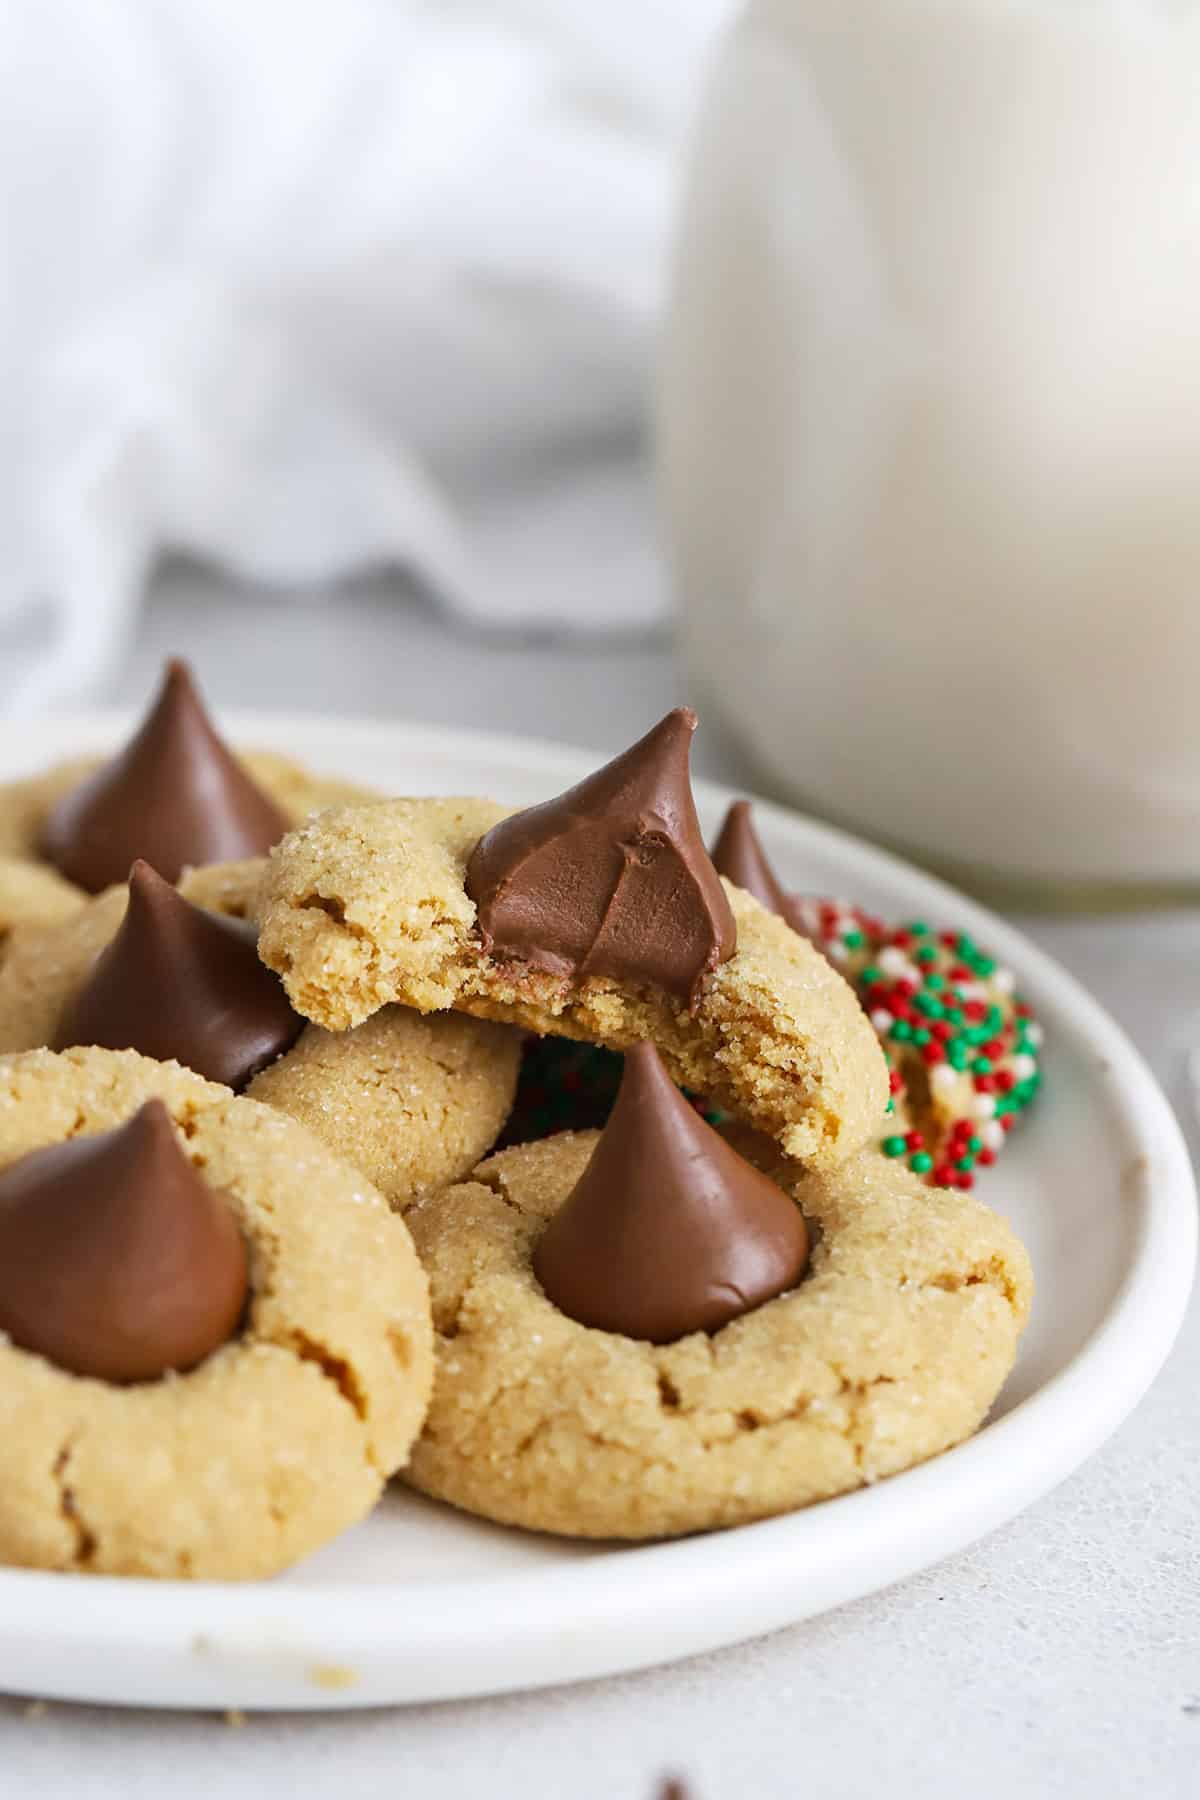 A plate stacked with gluten-free peanut butter blossom cookies. One has a bite out of it, revealing a soft, chewy texture.